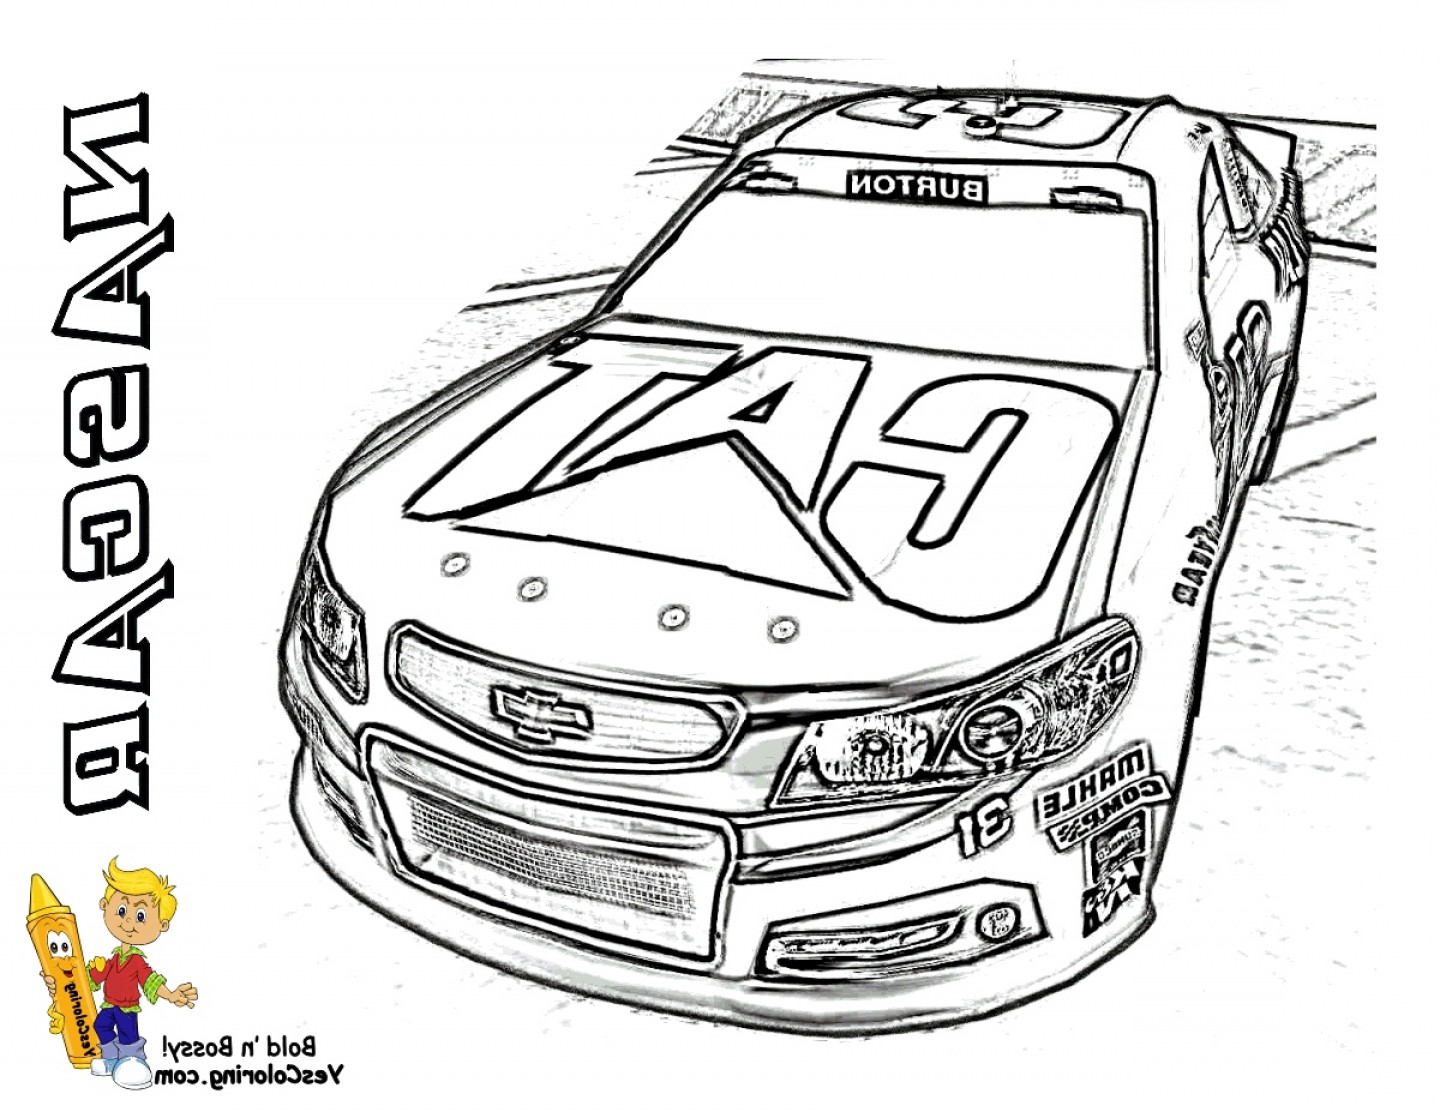 how to draw a nascar Nascar car sketch vector paintingvalley sketches